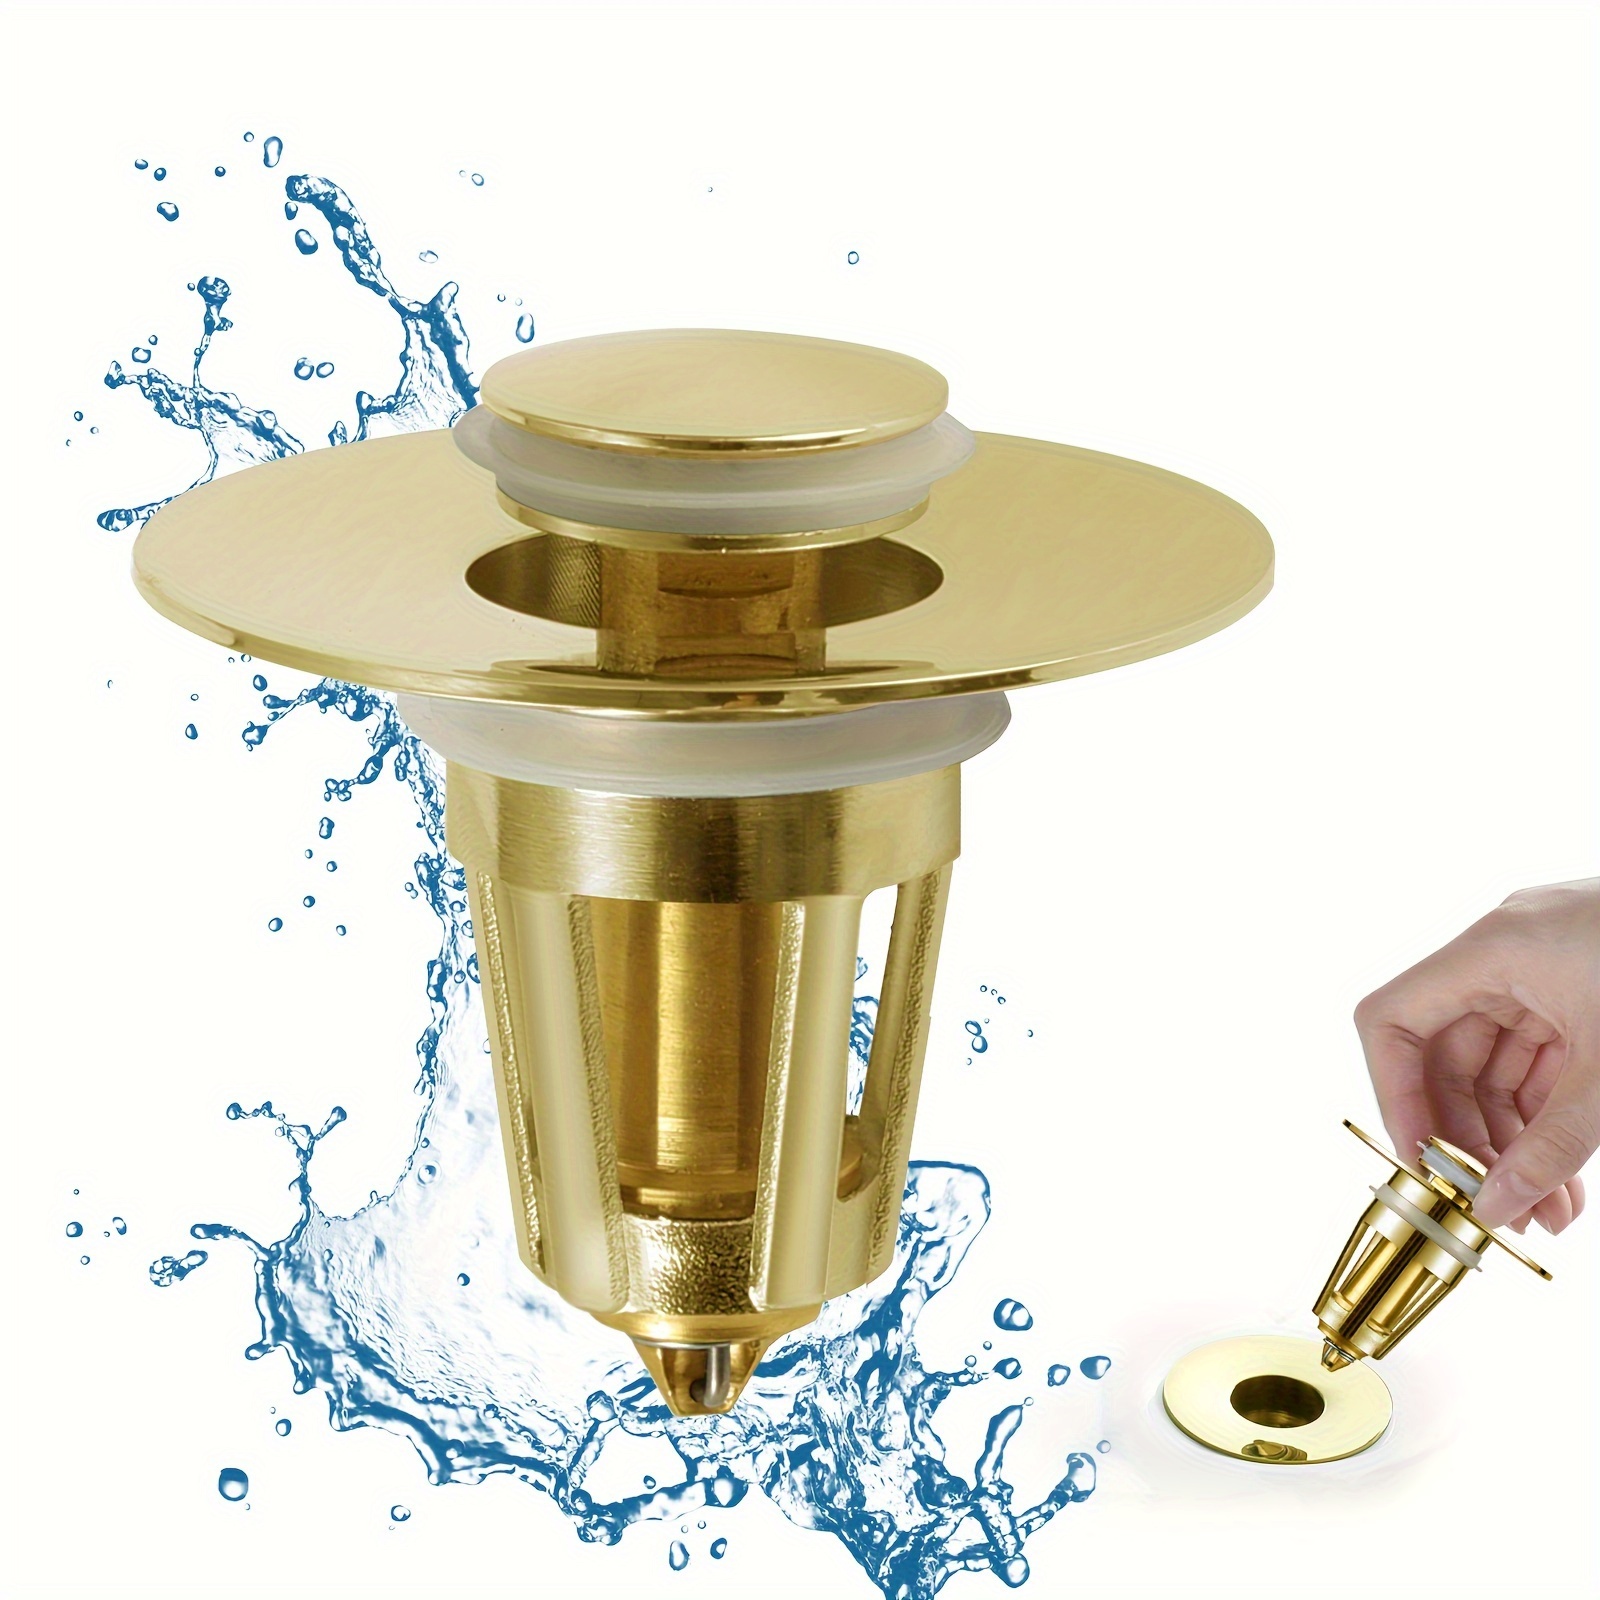 

1pc Golden Bathroom Sink Stopper, Anti-clogging Brass Strainer With Pop-up Drain Plug, Universal Fit For Standard Sink Holes (1.06-1.42 Inches), Easy Push Down & Pop Up Water Control